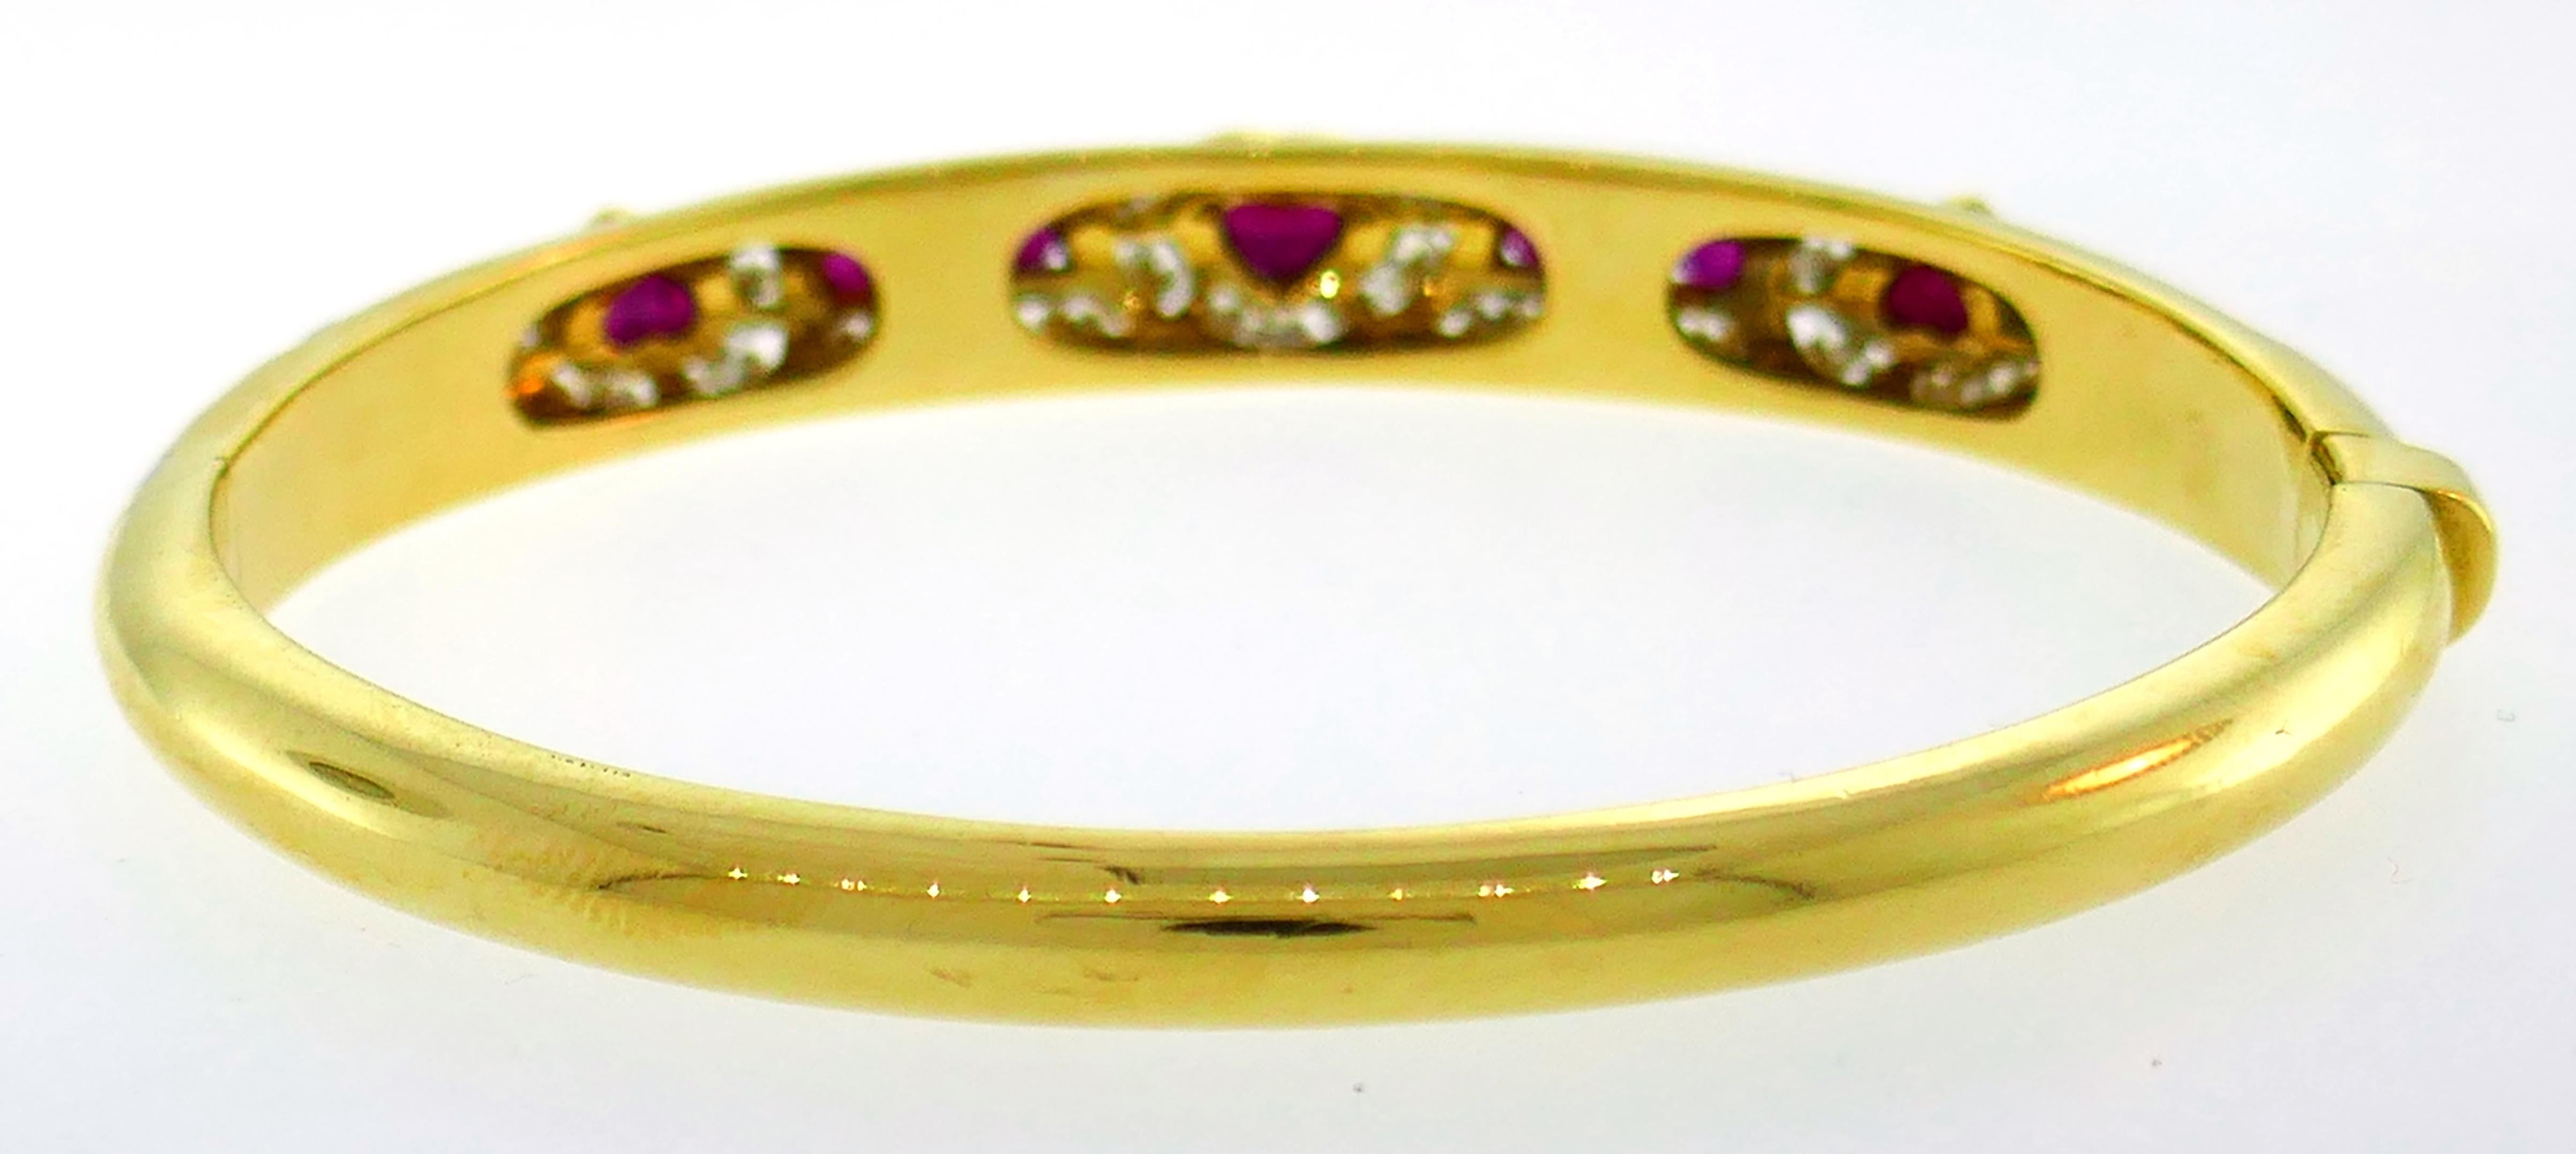 Women's Fred Paris Heart Ruby Yellow Gold Bangle Bracelet with Diamond Accents, 1970s